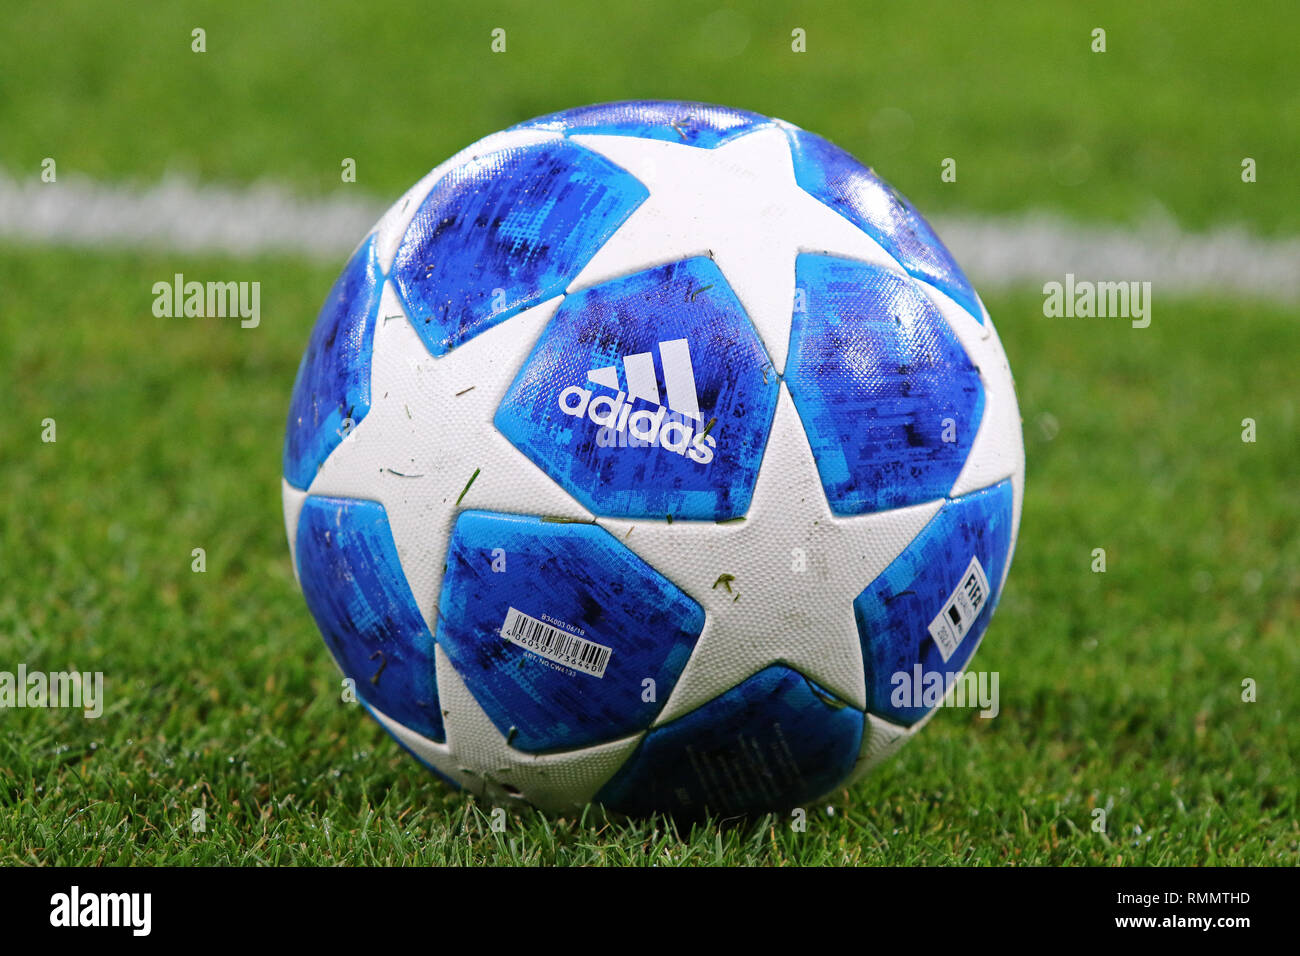 KYIV, UKRAINE - AUGUST 28, 2018: Official UEFA Champions League season match ball on the grass during the UEFA Champions League play-off game Stock Photo - Alamy